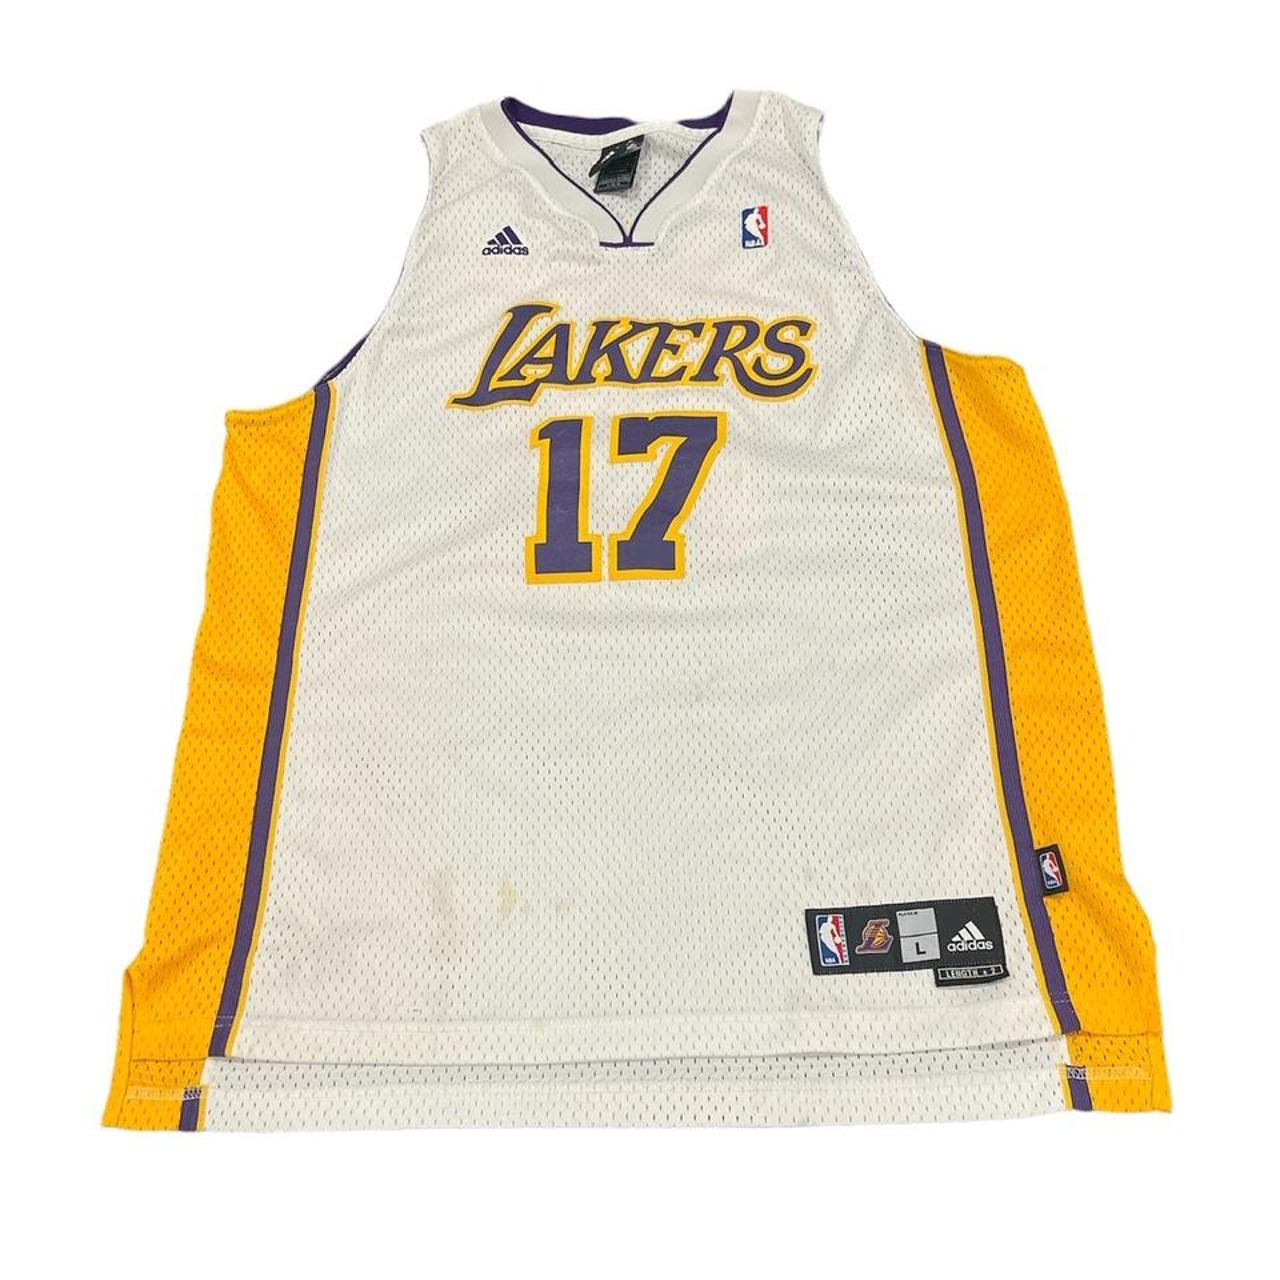 Adidas Lakers Bynum Jersey - Size large - Some - Depop